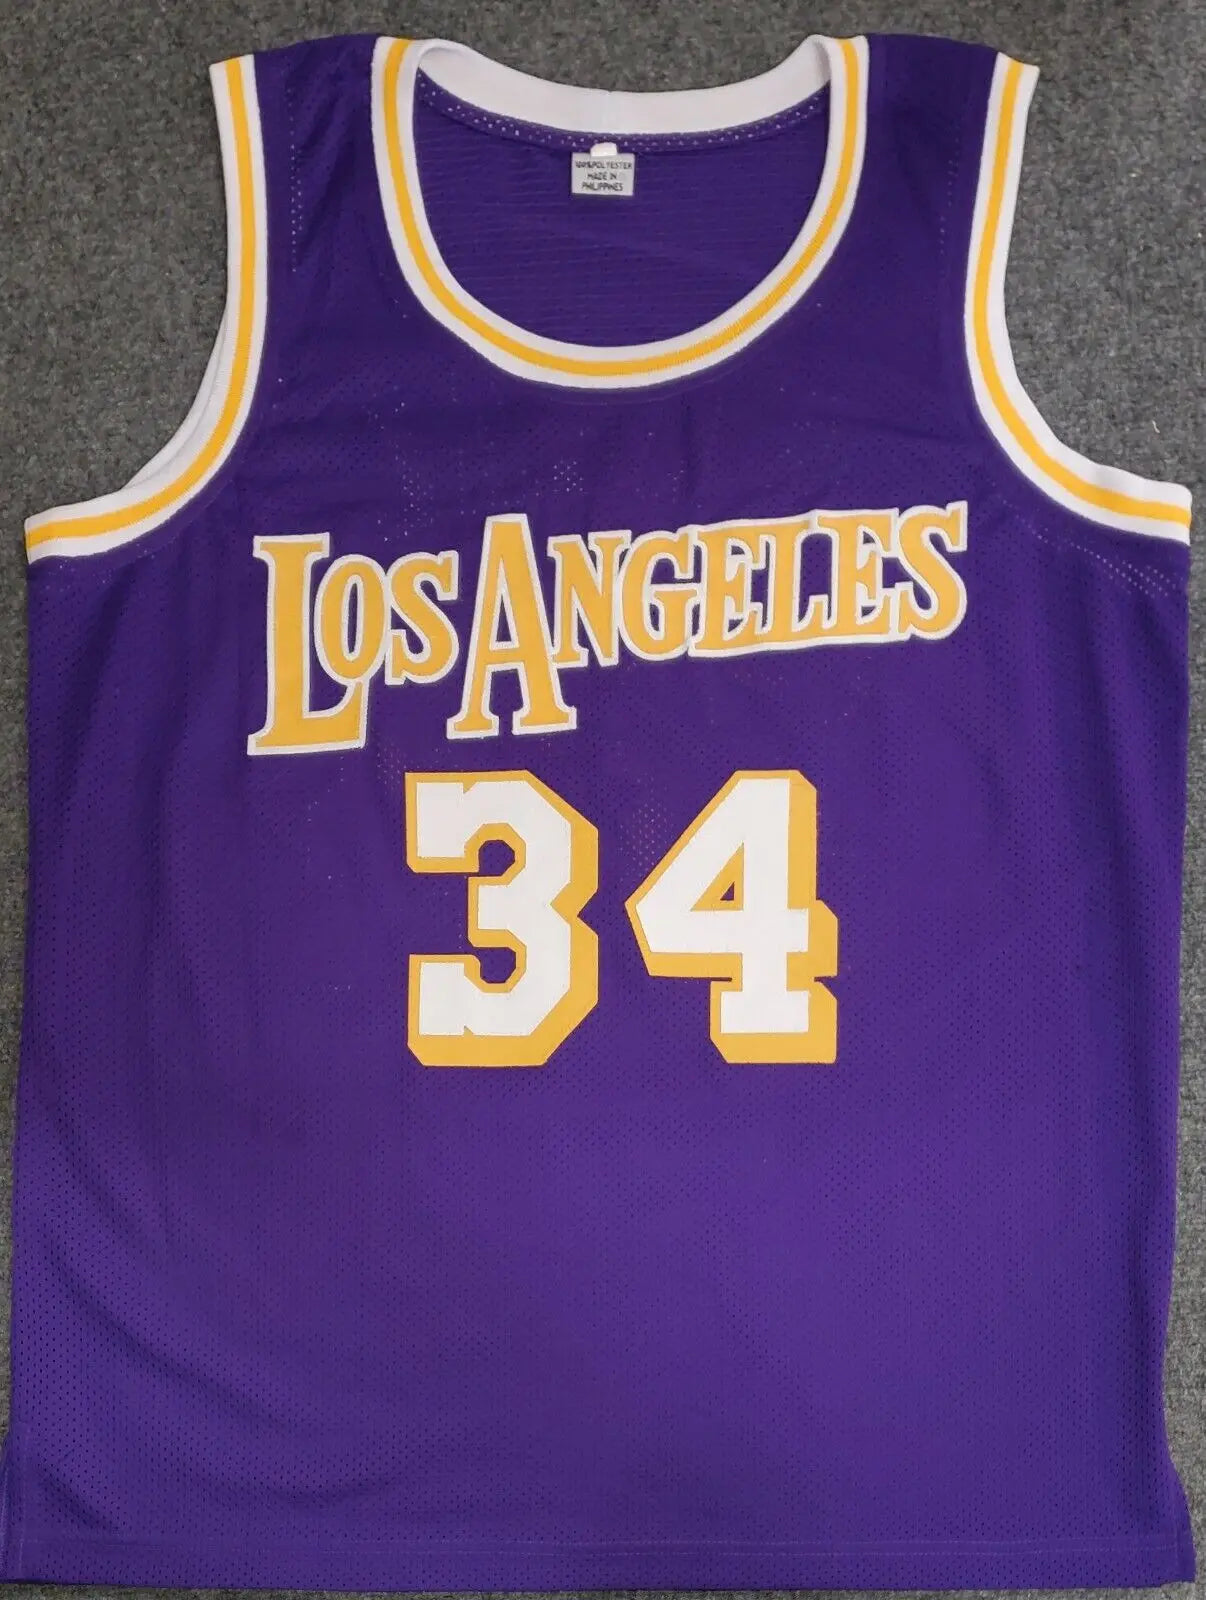 Shaquille O'Neal Los Angeles Lakers Jerseys, Shaquille O'Neal